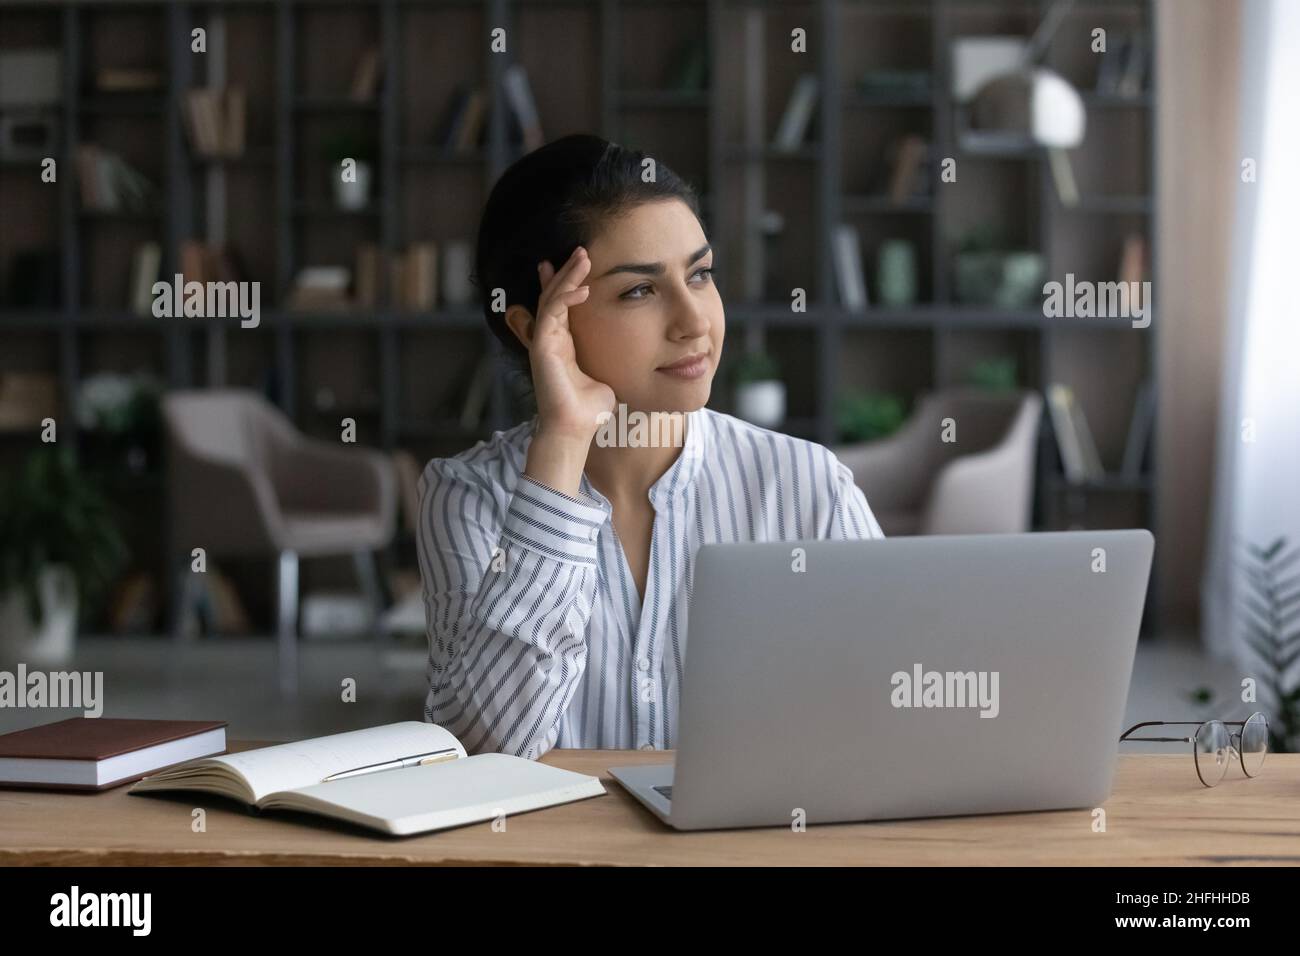 Thoughtful young Indian ethnicity business woman working in office. Stock Photo